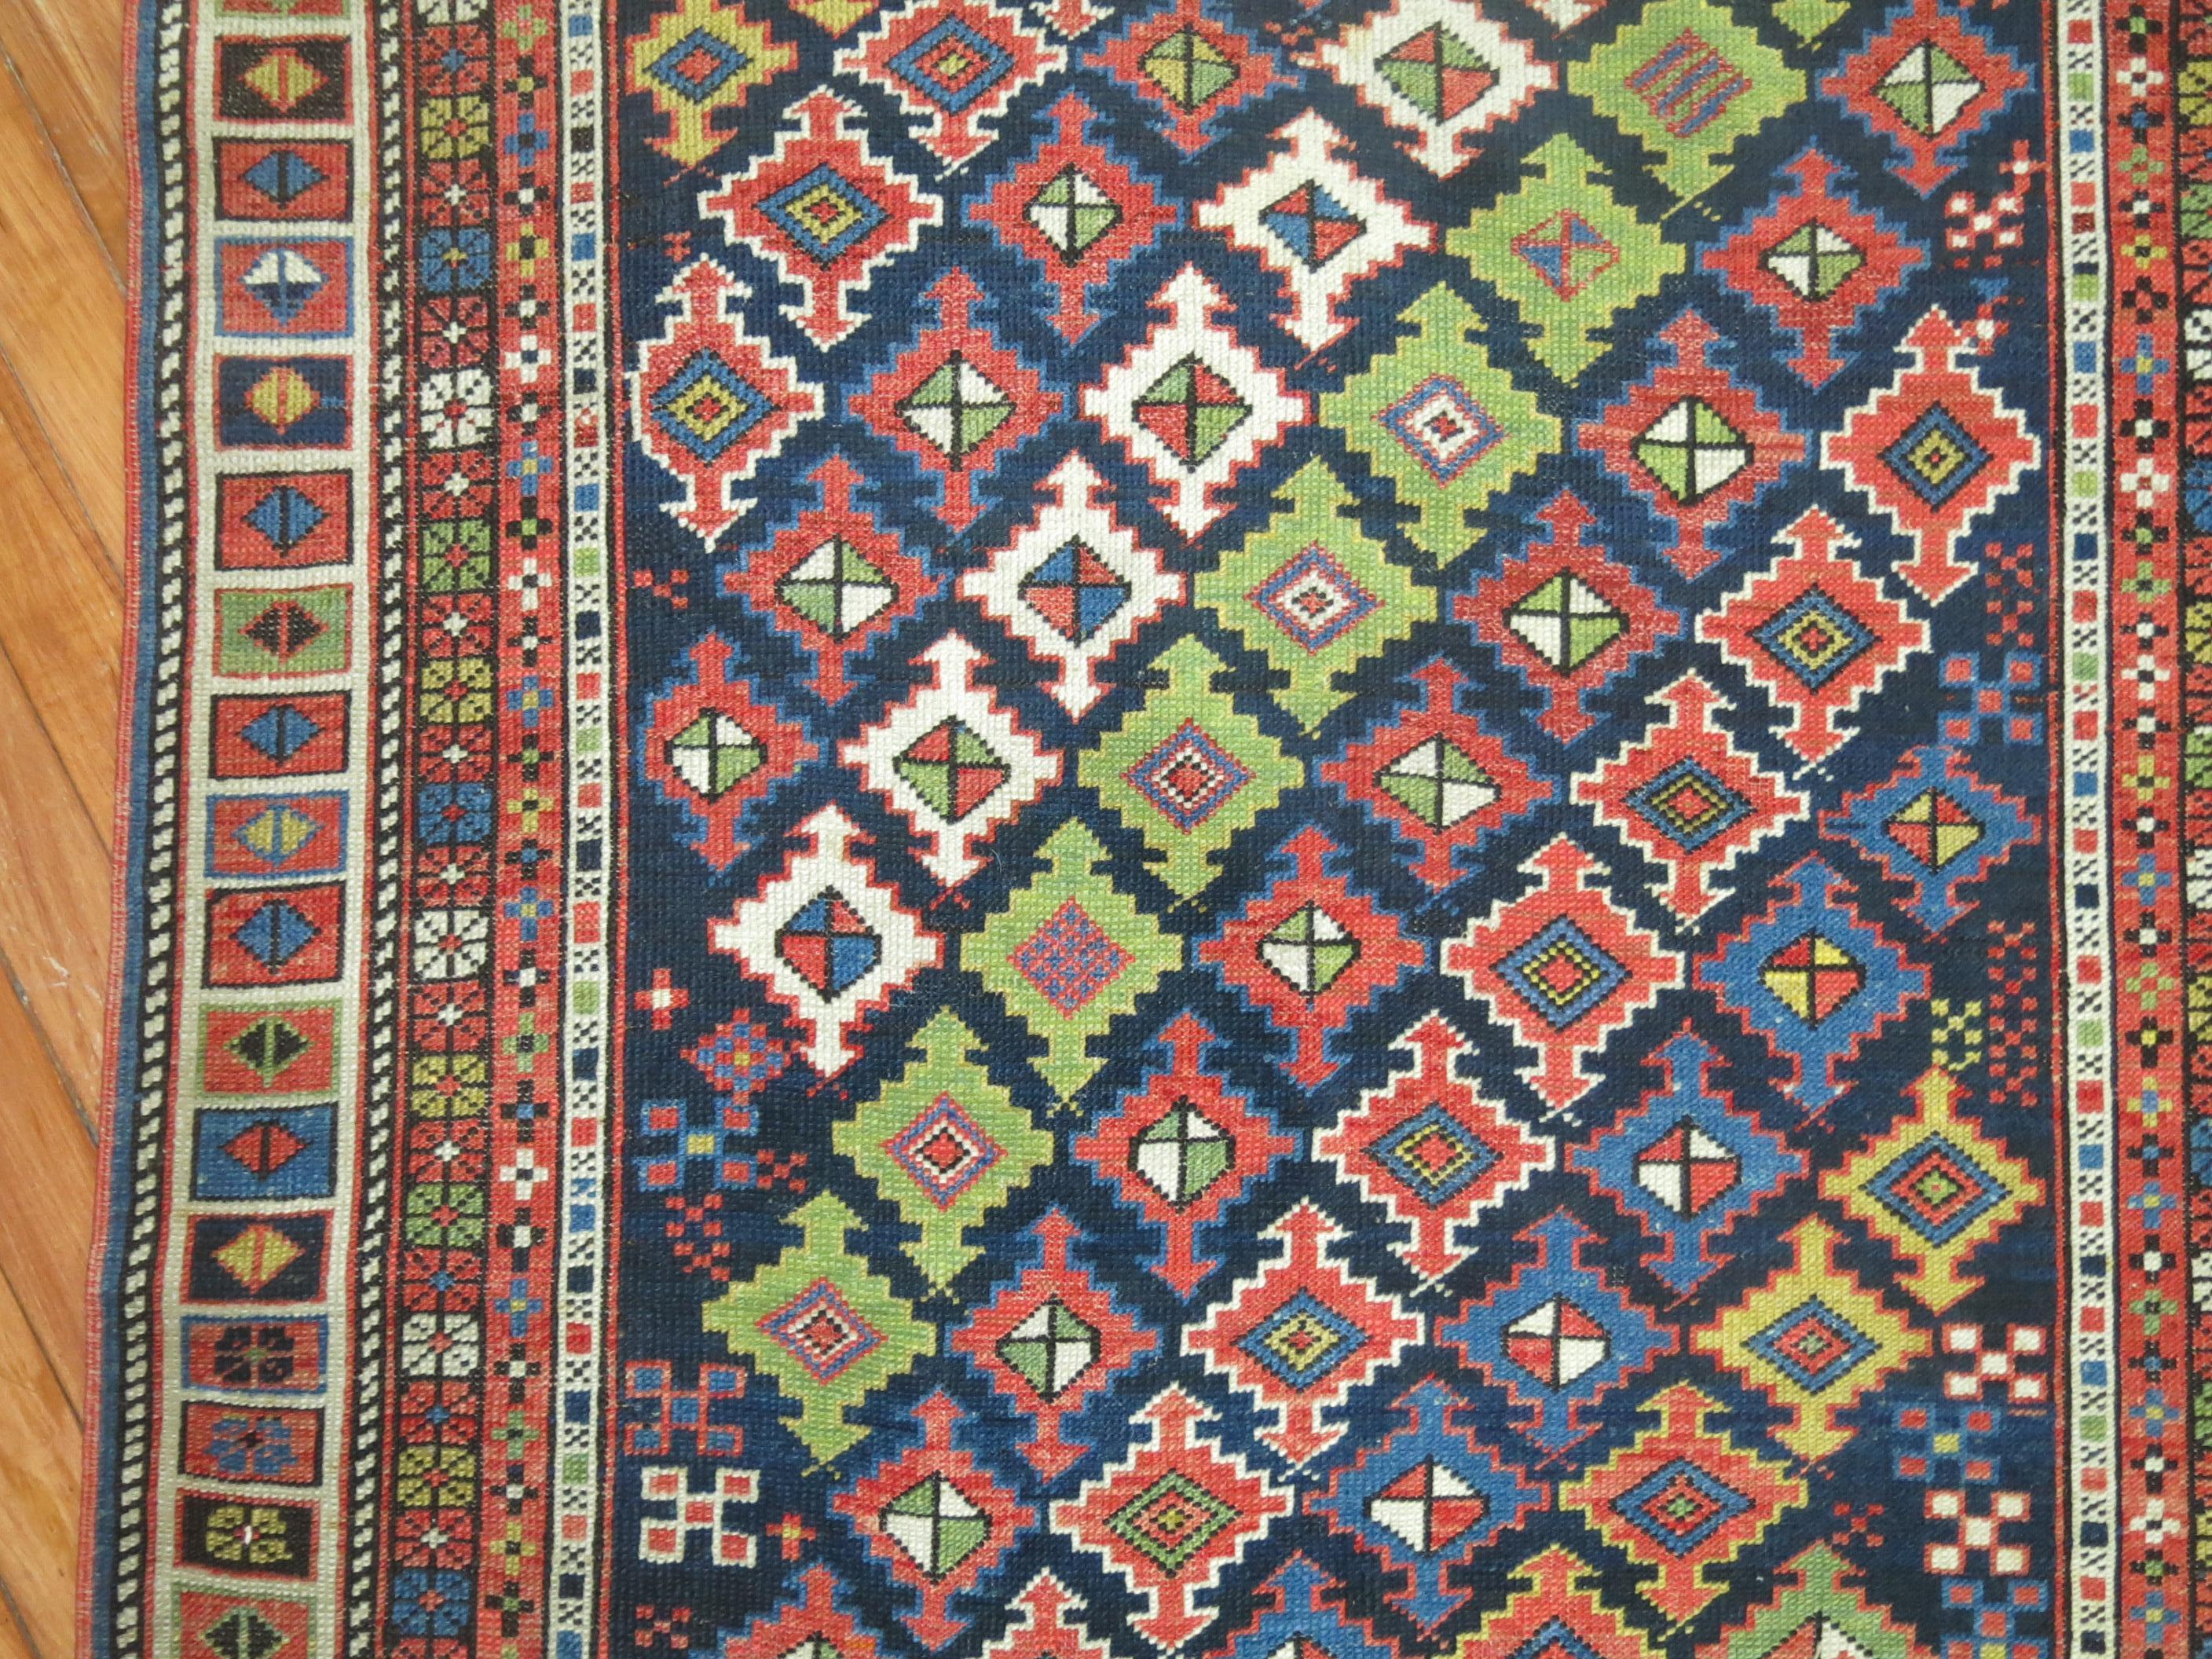 Early 20th century Antique Caucasian rug with a dazzling color combination on a navy ground. Very light and can be used as a wall hanging.

Measures: 3'5